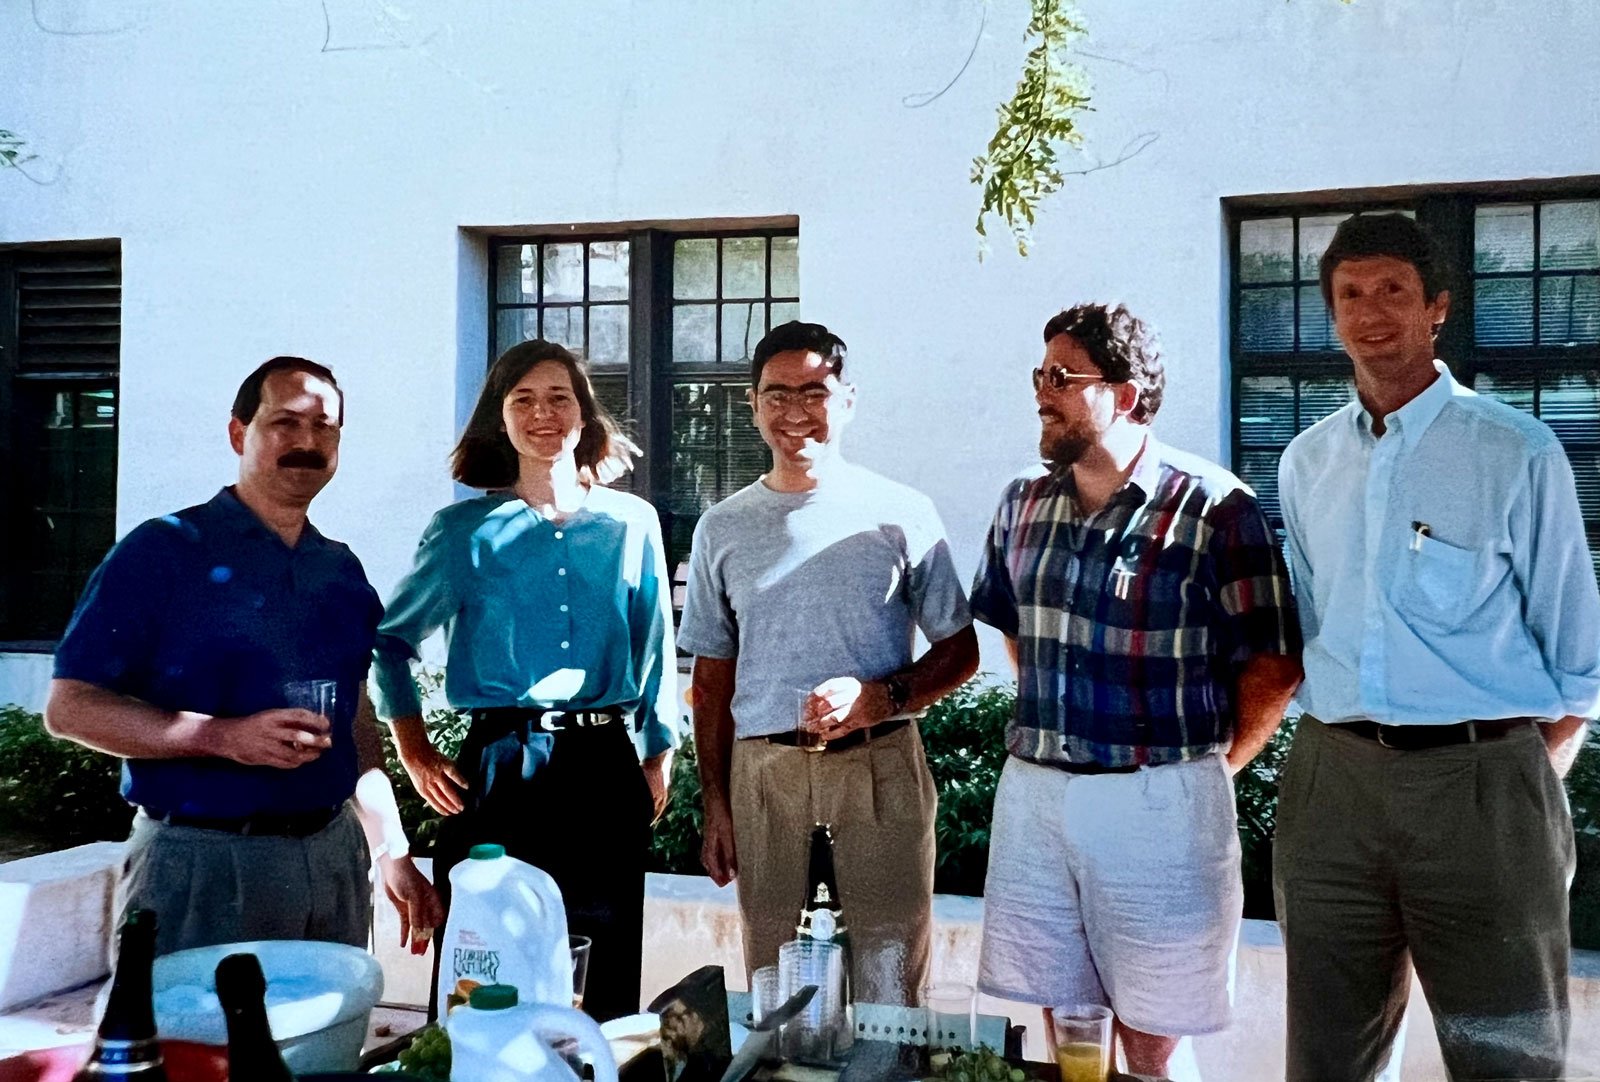  Patapoutian (center) with his committee at Caltech after defending his PhD thesis. From left to right: Elliot Meyerowitz, Barbara Wold, Ardem Patapoutian, David Anderson, Scott Fraser.  Photo courtesy Ardem Patapoutian.  